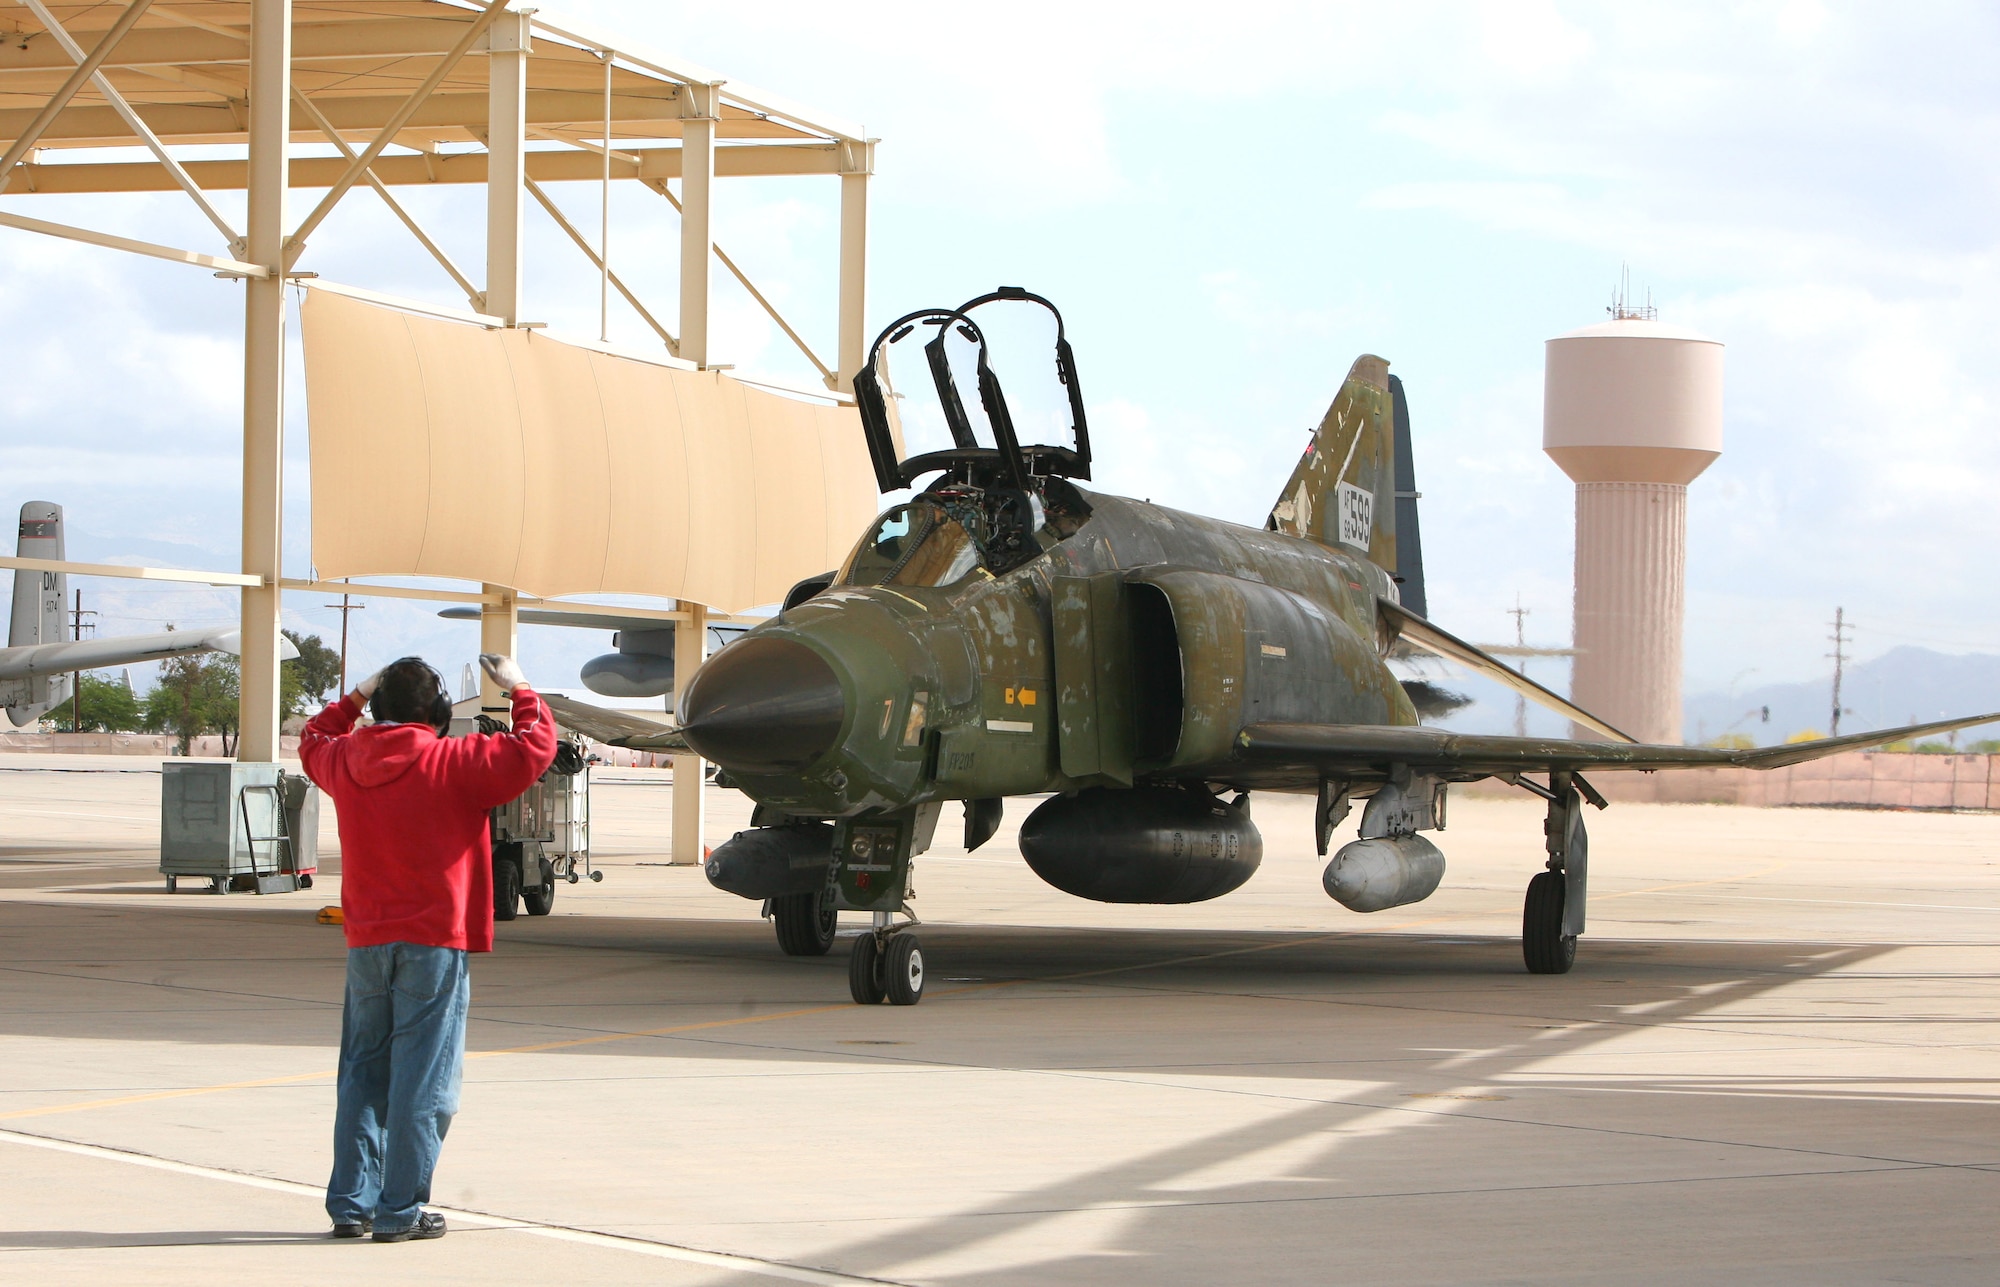 Eddie Caro, crew chief on F-4 Phantom tail number 68-0599, launches the final F-4 delivery to BAE Systems in Mojave, Calif., at Davis-Monthan Air Force Base, Ariz., April 17, 2013. BAE Systems will convert the aircraft into a drone and eventually deliver the jet to Tyndall AFB, Fla. (Courtesy photo/Released)